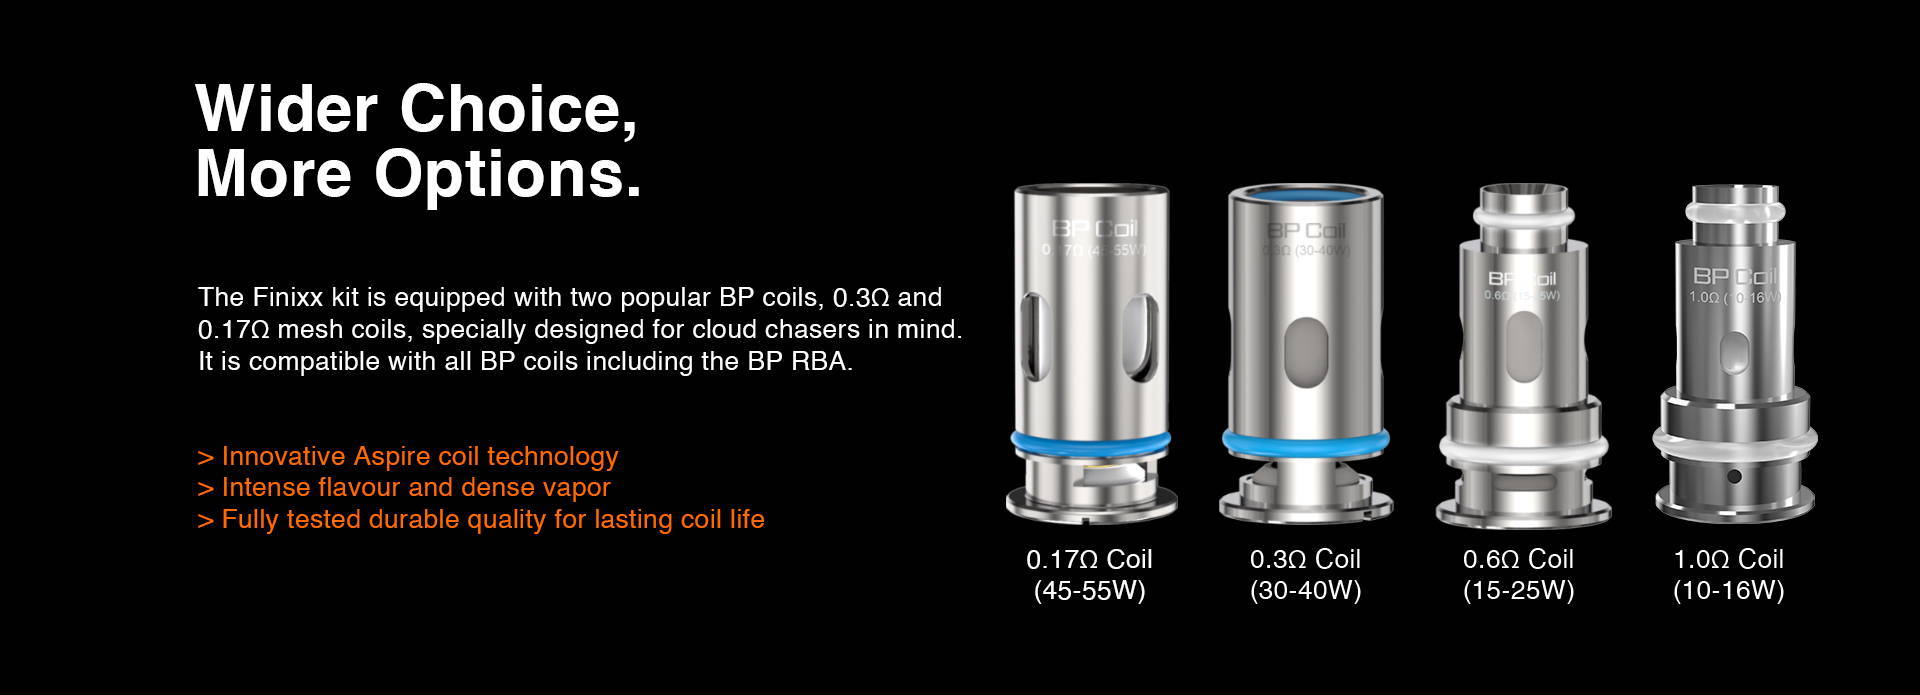 Finixx kit is equipped with two popular BP coils, 0.3Ω and 0.17Ω mesh coils, specially designed for cloud chasers. It is also compatible with all BP coils including the BP RBA.  Small bill, big thrill.  > Innovative Aspire coil technology > Intense flavor and dense vapor comparable to an RDA > 100% vaporize the original taste of your e-liquid > Fully tested durable quality for lasting coil life